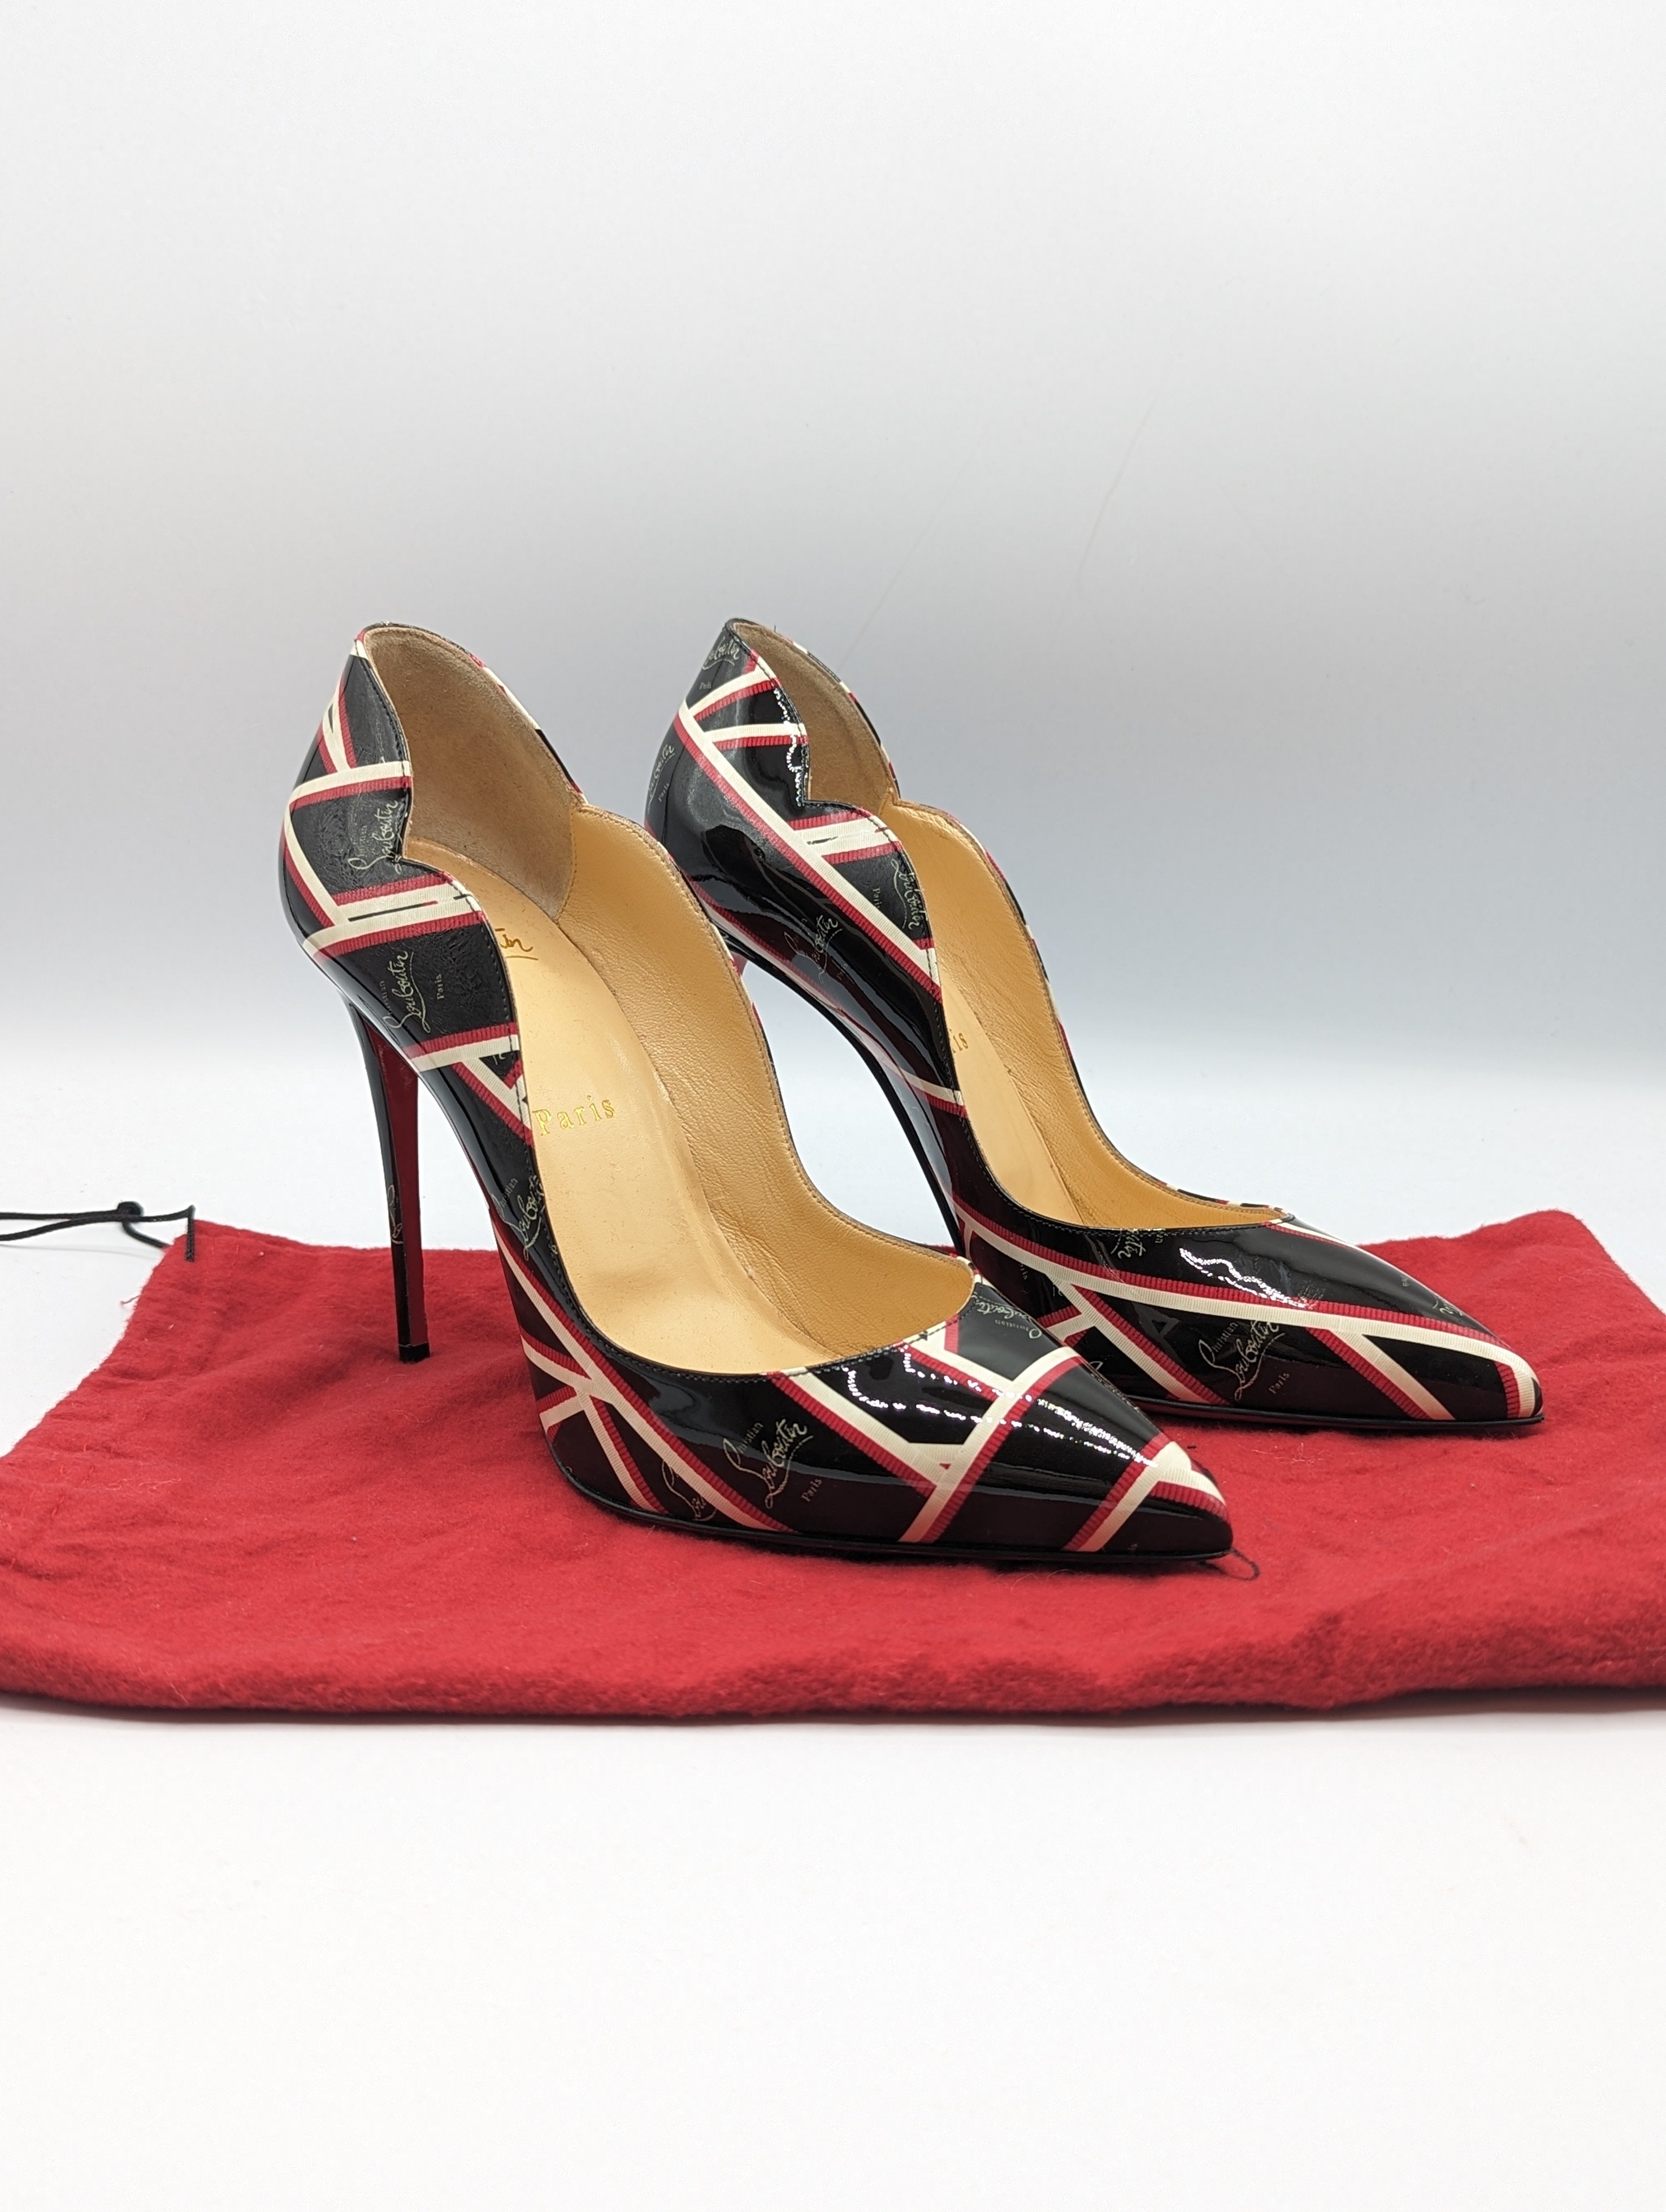 Christian Louboutin Hot Chick Patent Ribbon Pumps Size 39 – For The Love of  Luxury